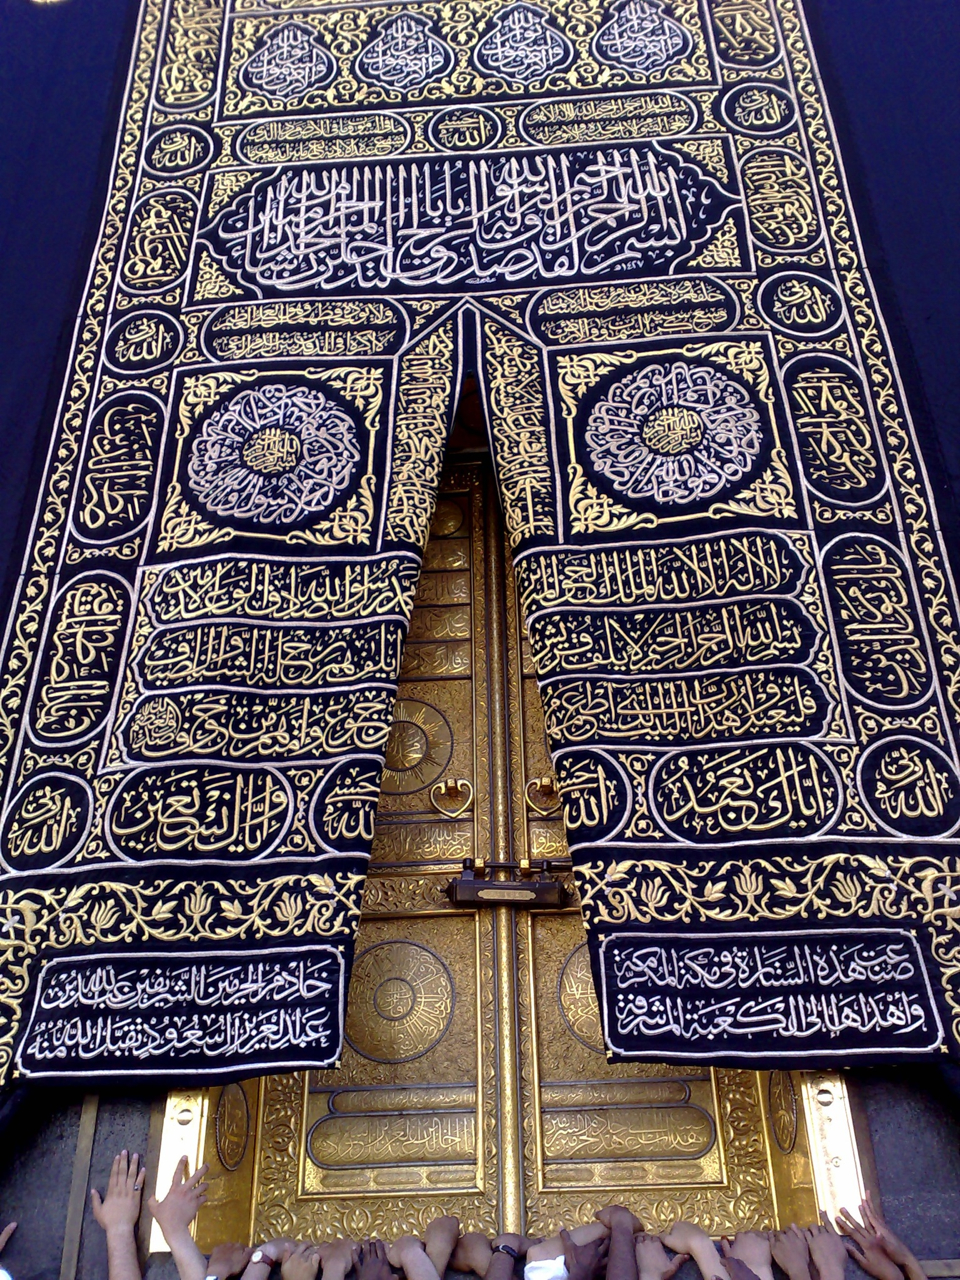 tumblr mbldqu3smQ1riue2zo1 1280 1 - What is written on the Kaaba?